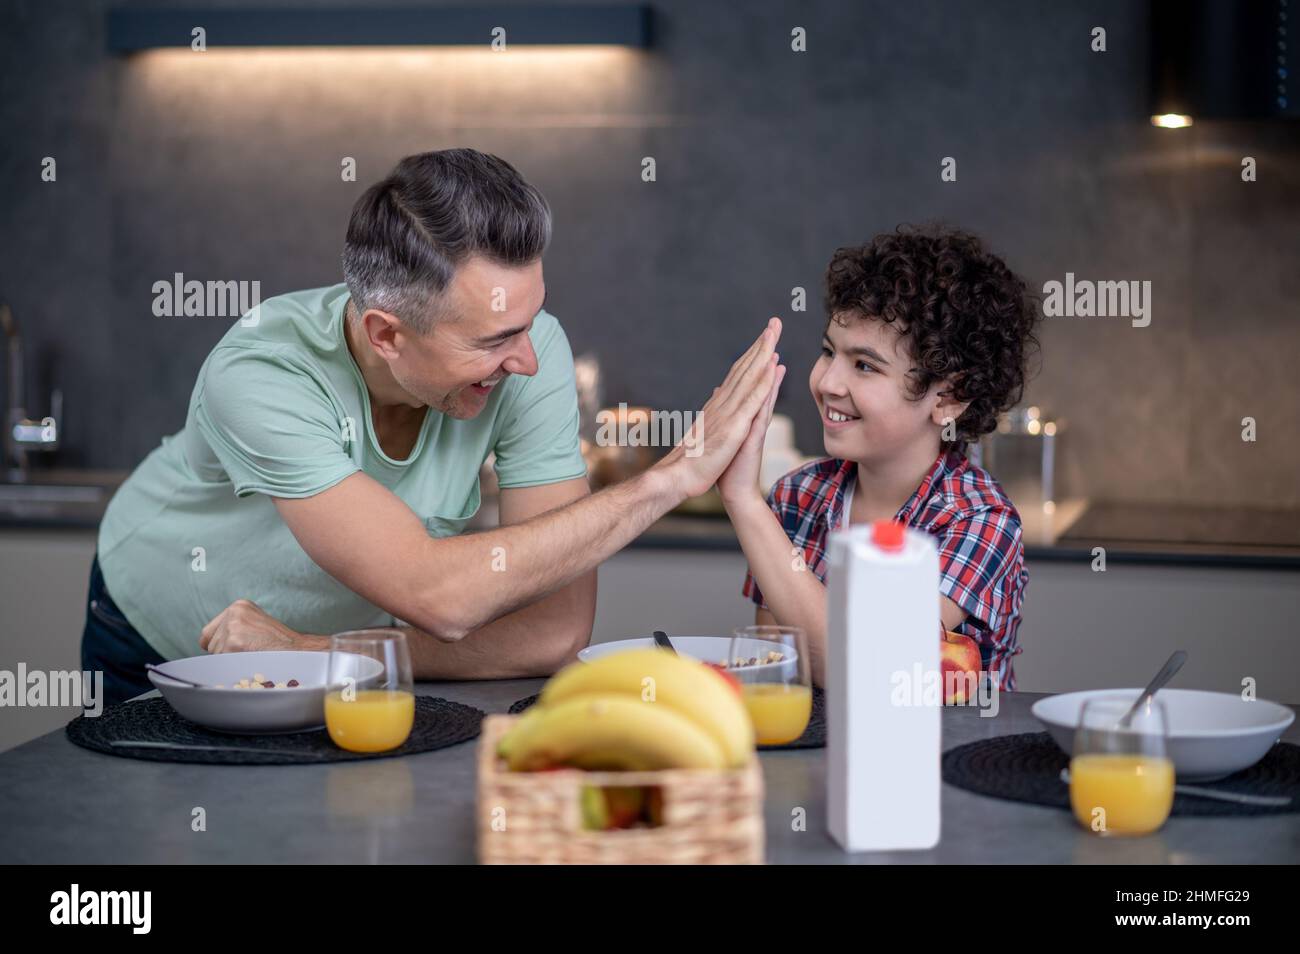 Man and boy touching palms as sign of understanding Stock Photo